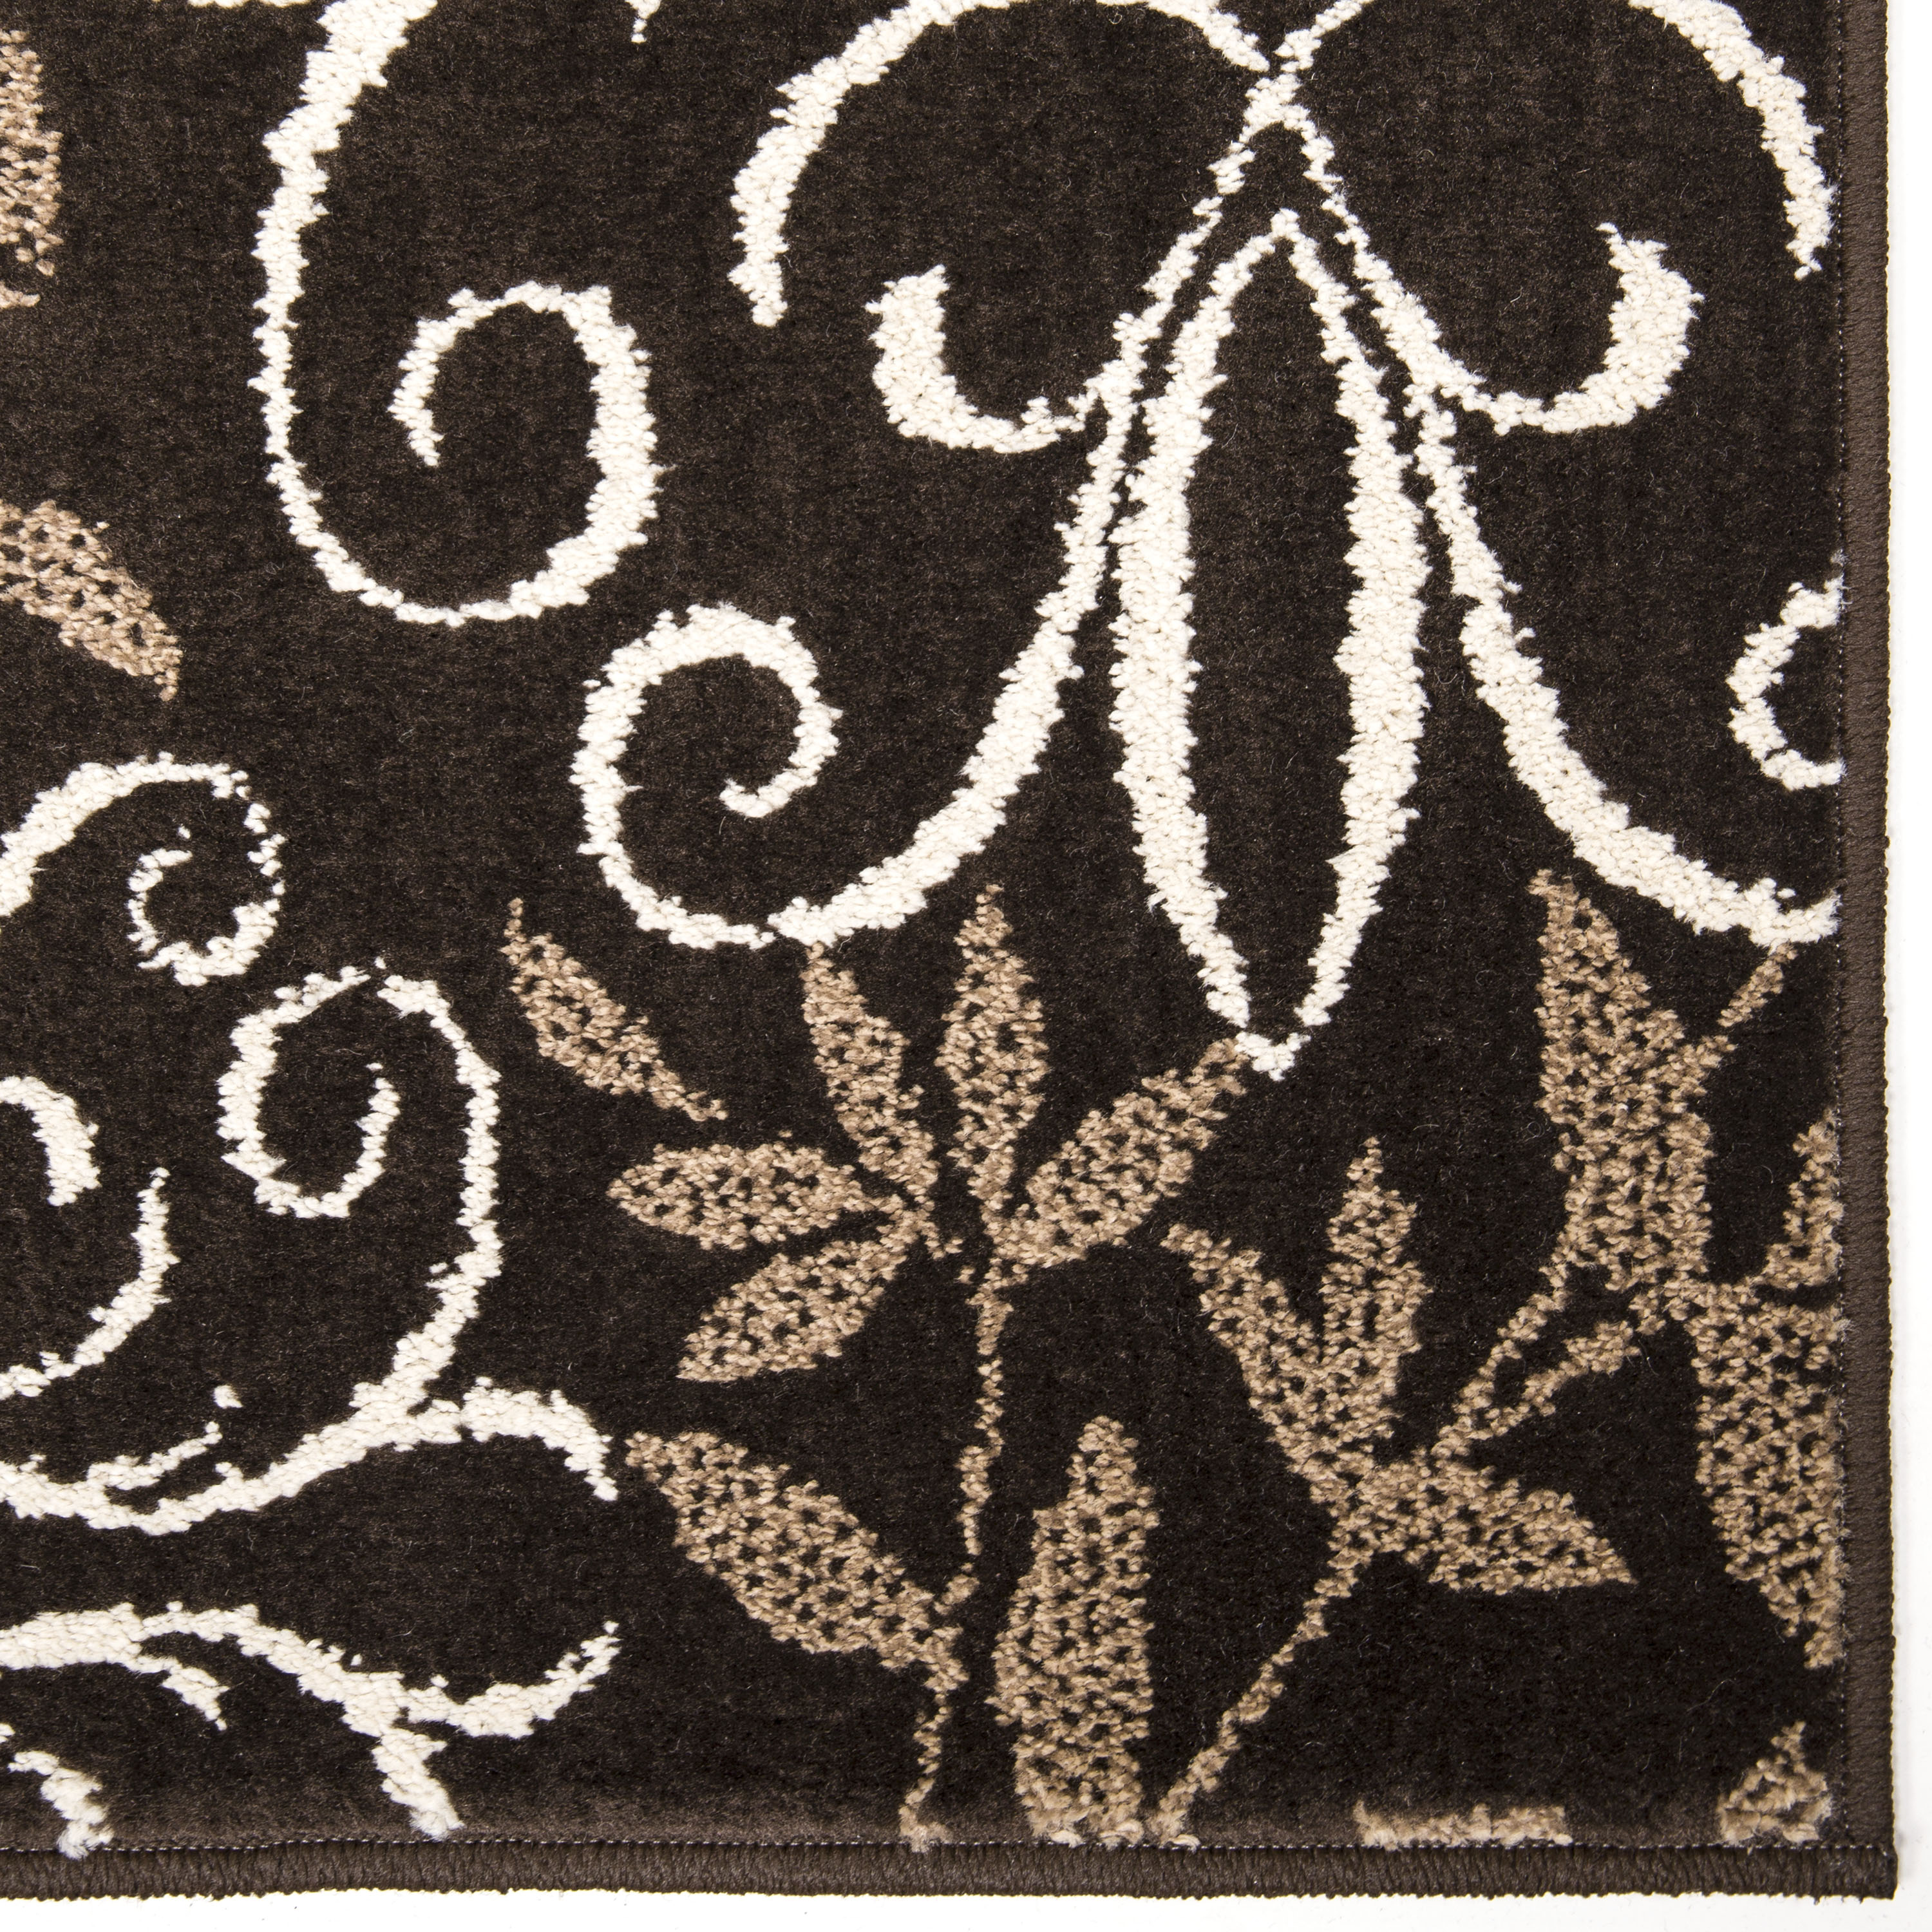 Better Homes & Gardens Iron Fleur Area Rug, Brown, 9' x 13' - image 4 of 10